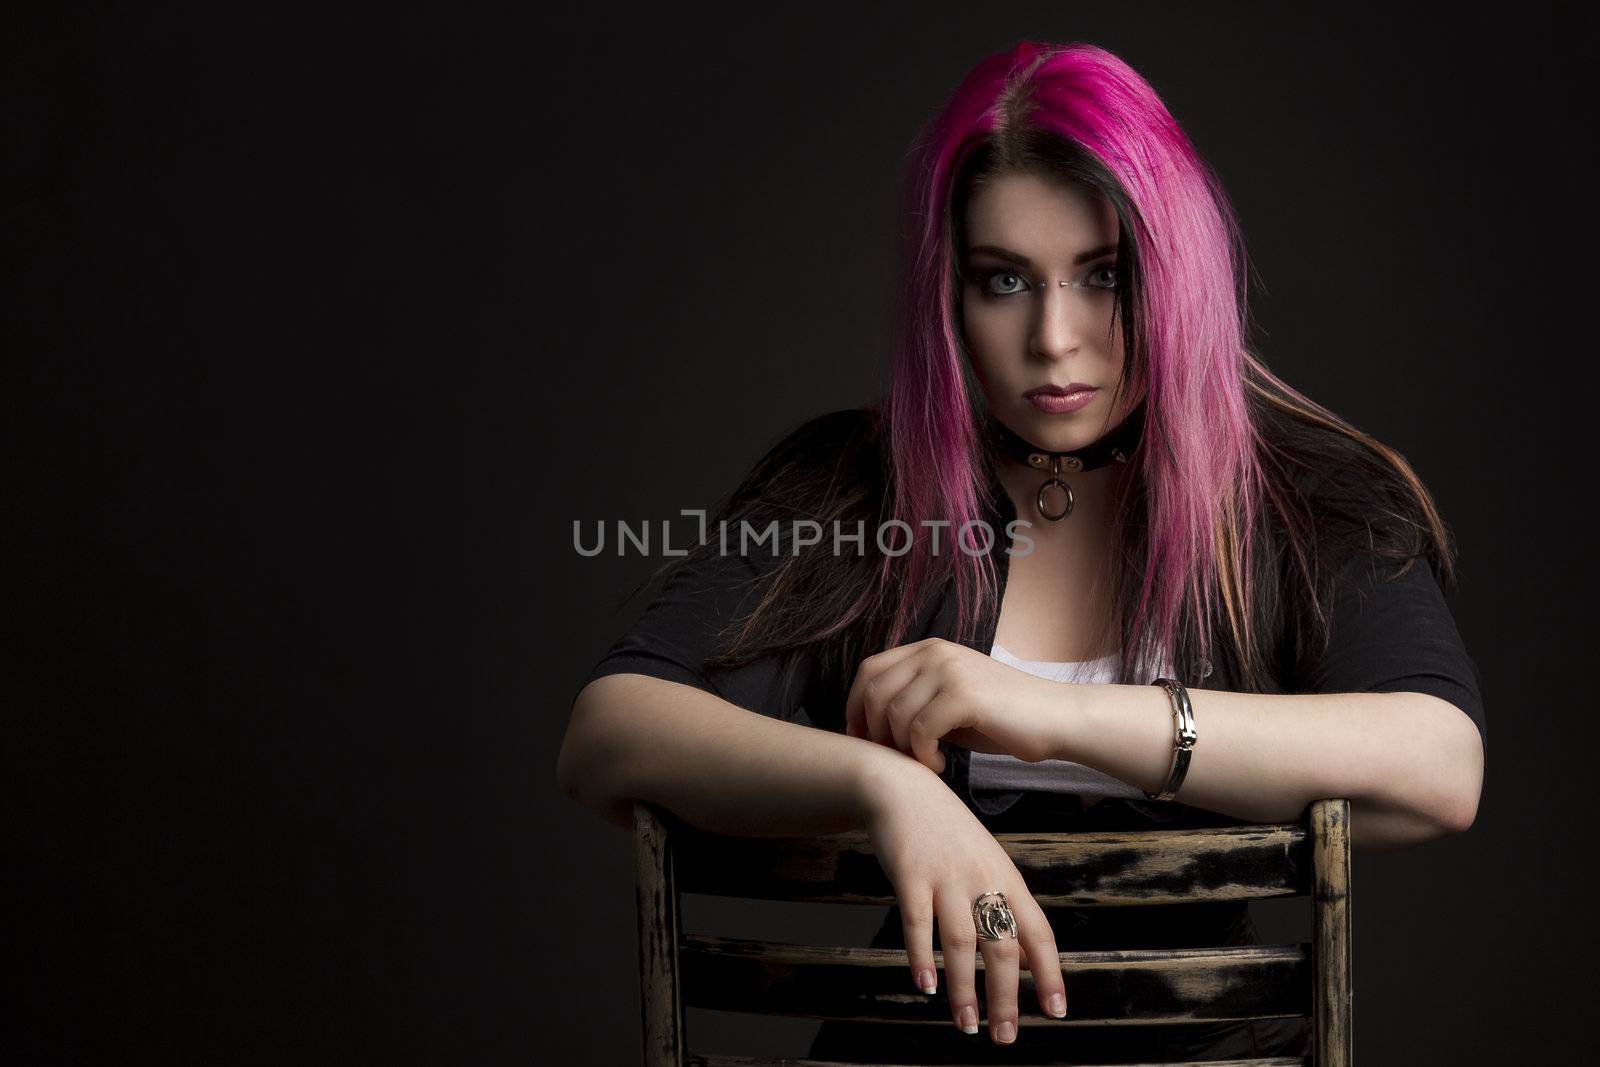 Goth girl with pink hair and body piercing sitting on chair